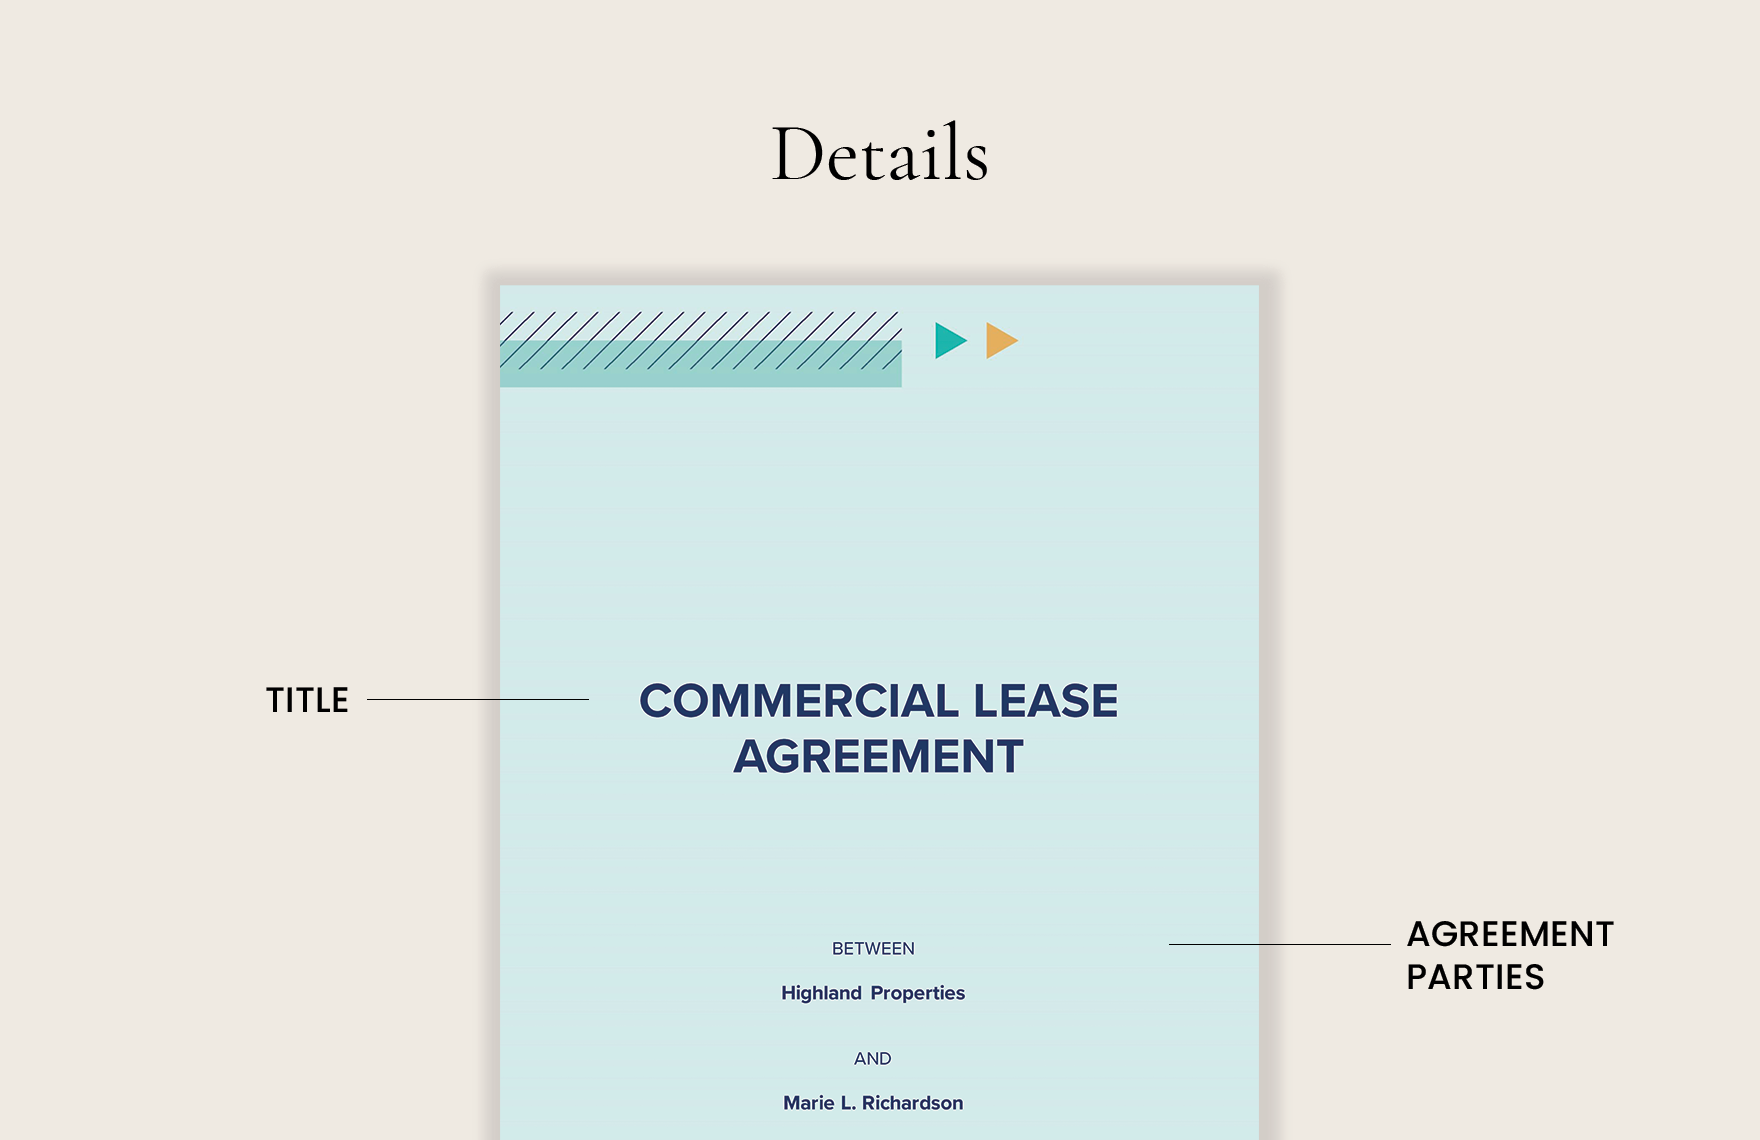 Commercial Lease Agreement 